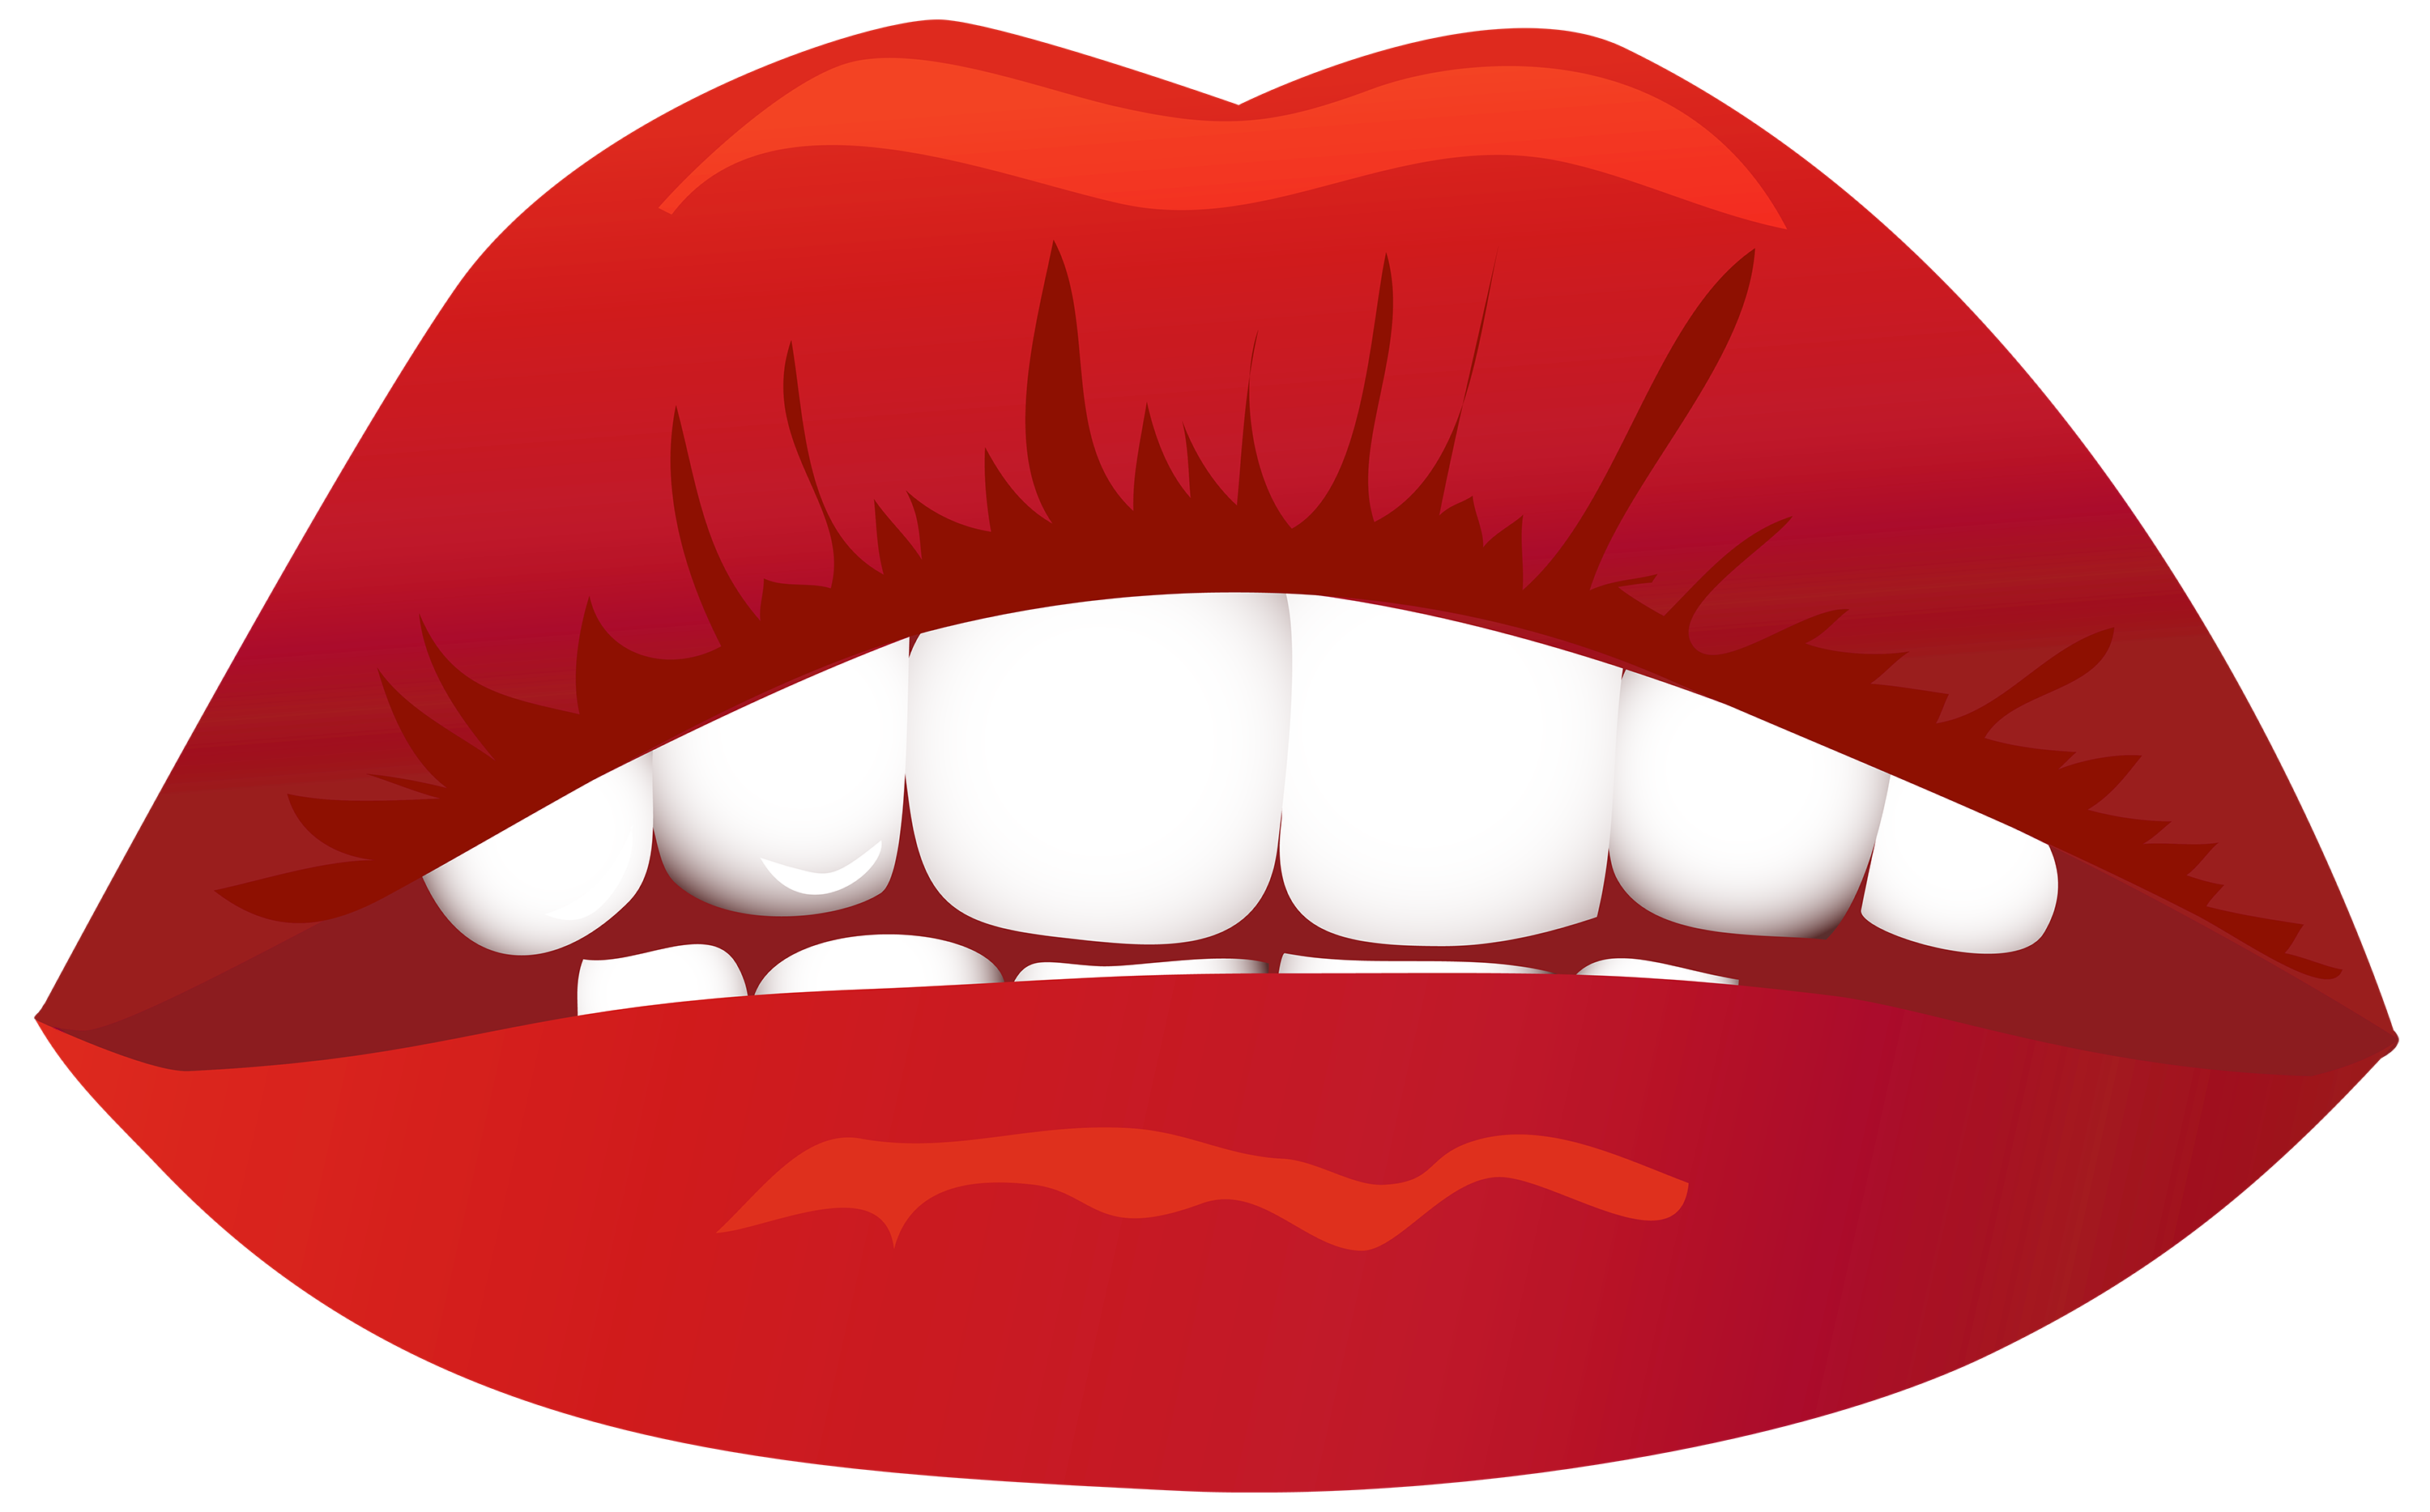 Cartoon Kissy Lips Clipart | Free download on ClipArtMag